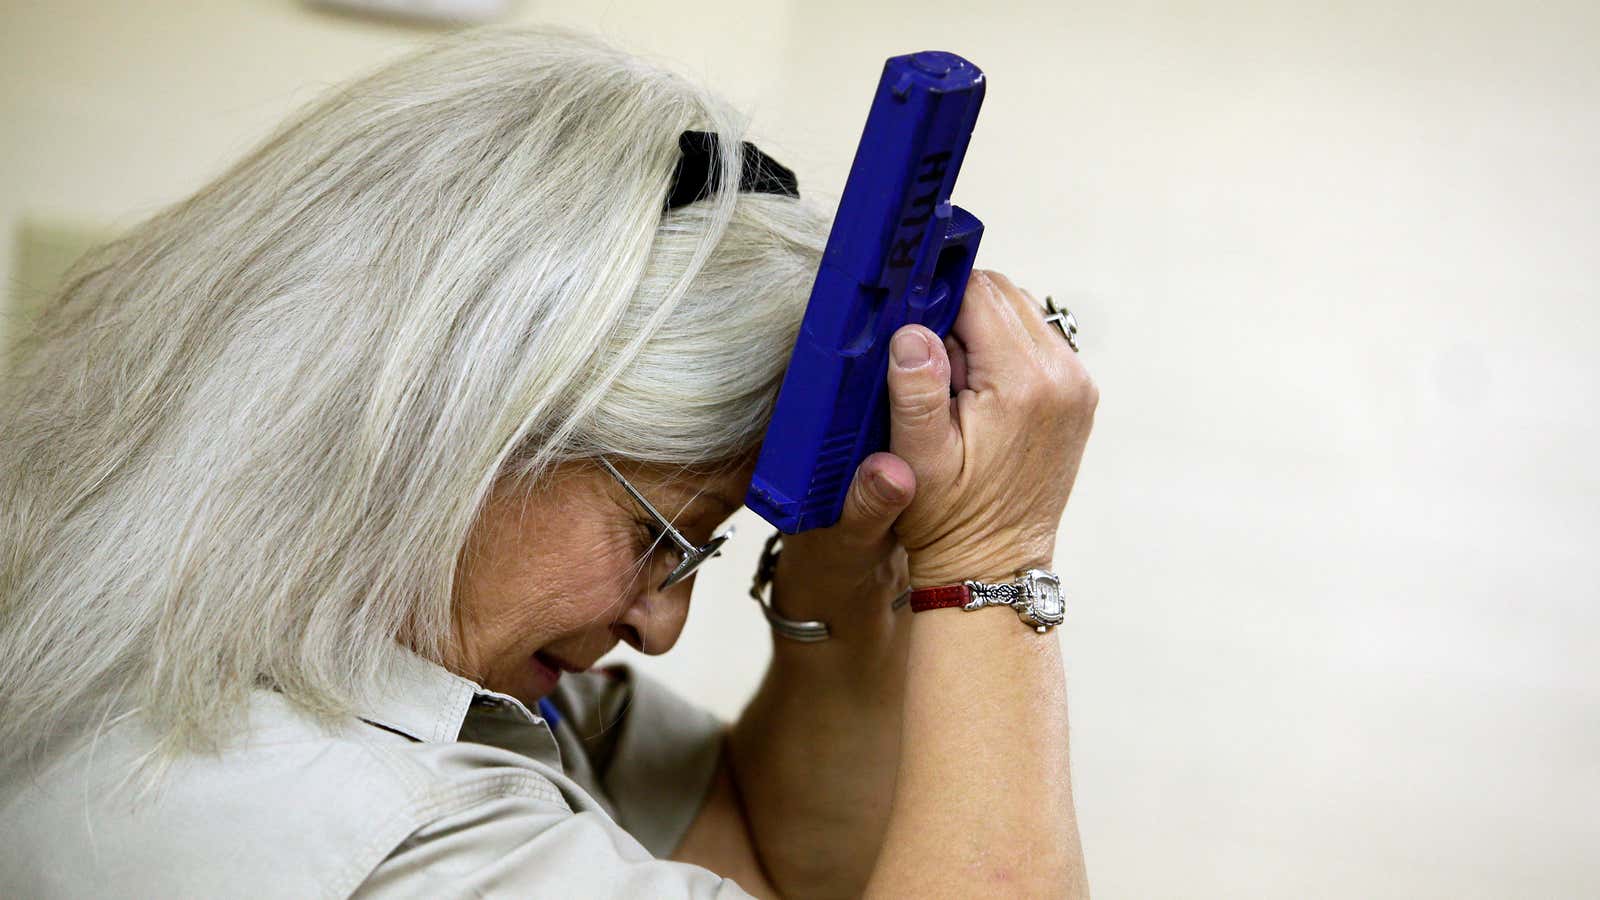 The key to passing comprehensive gun legislation might be in understanding worldview